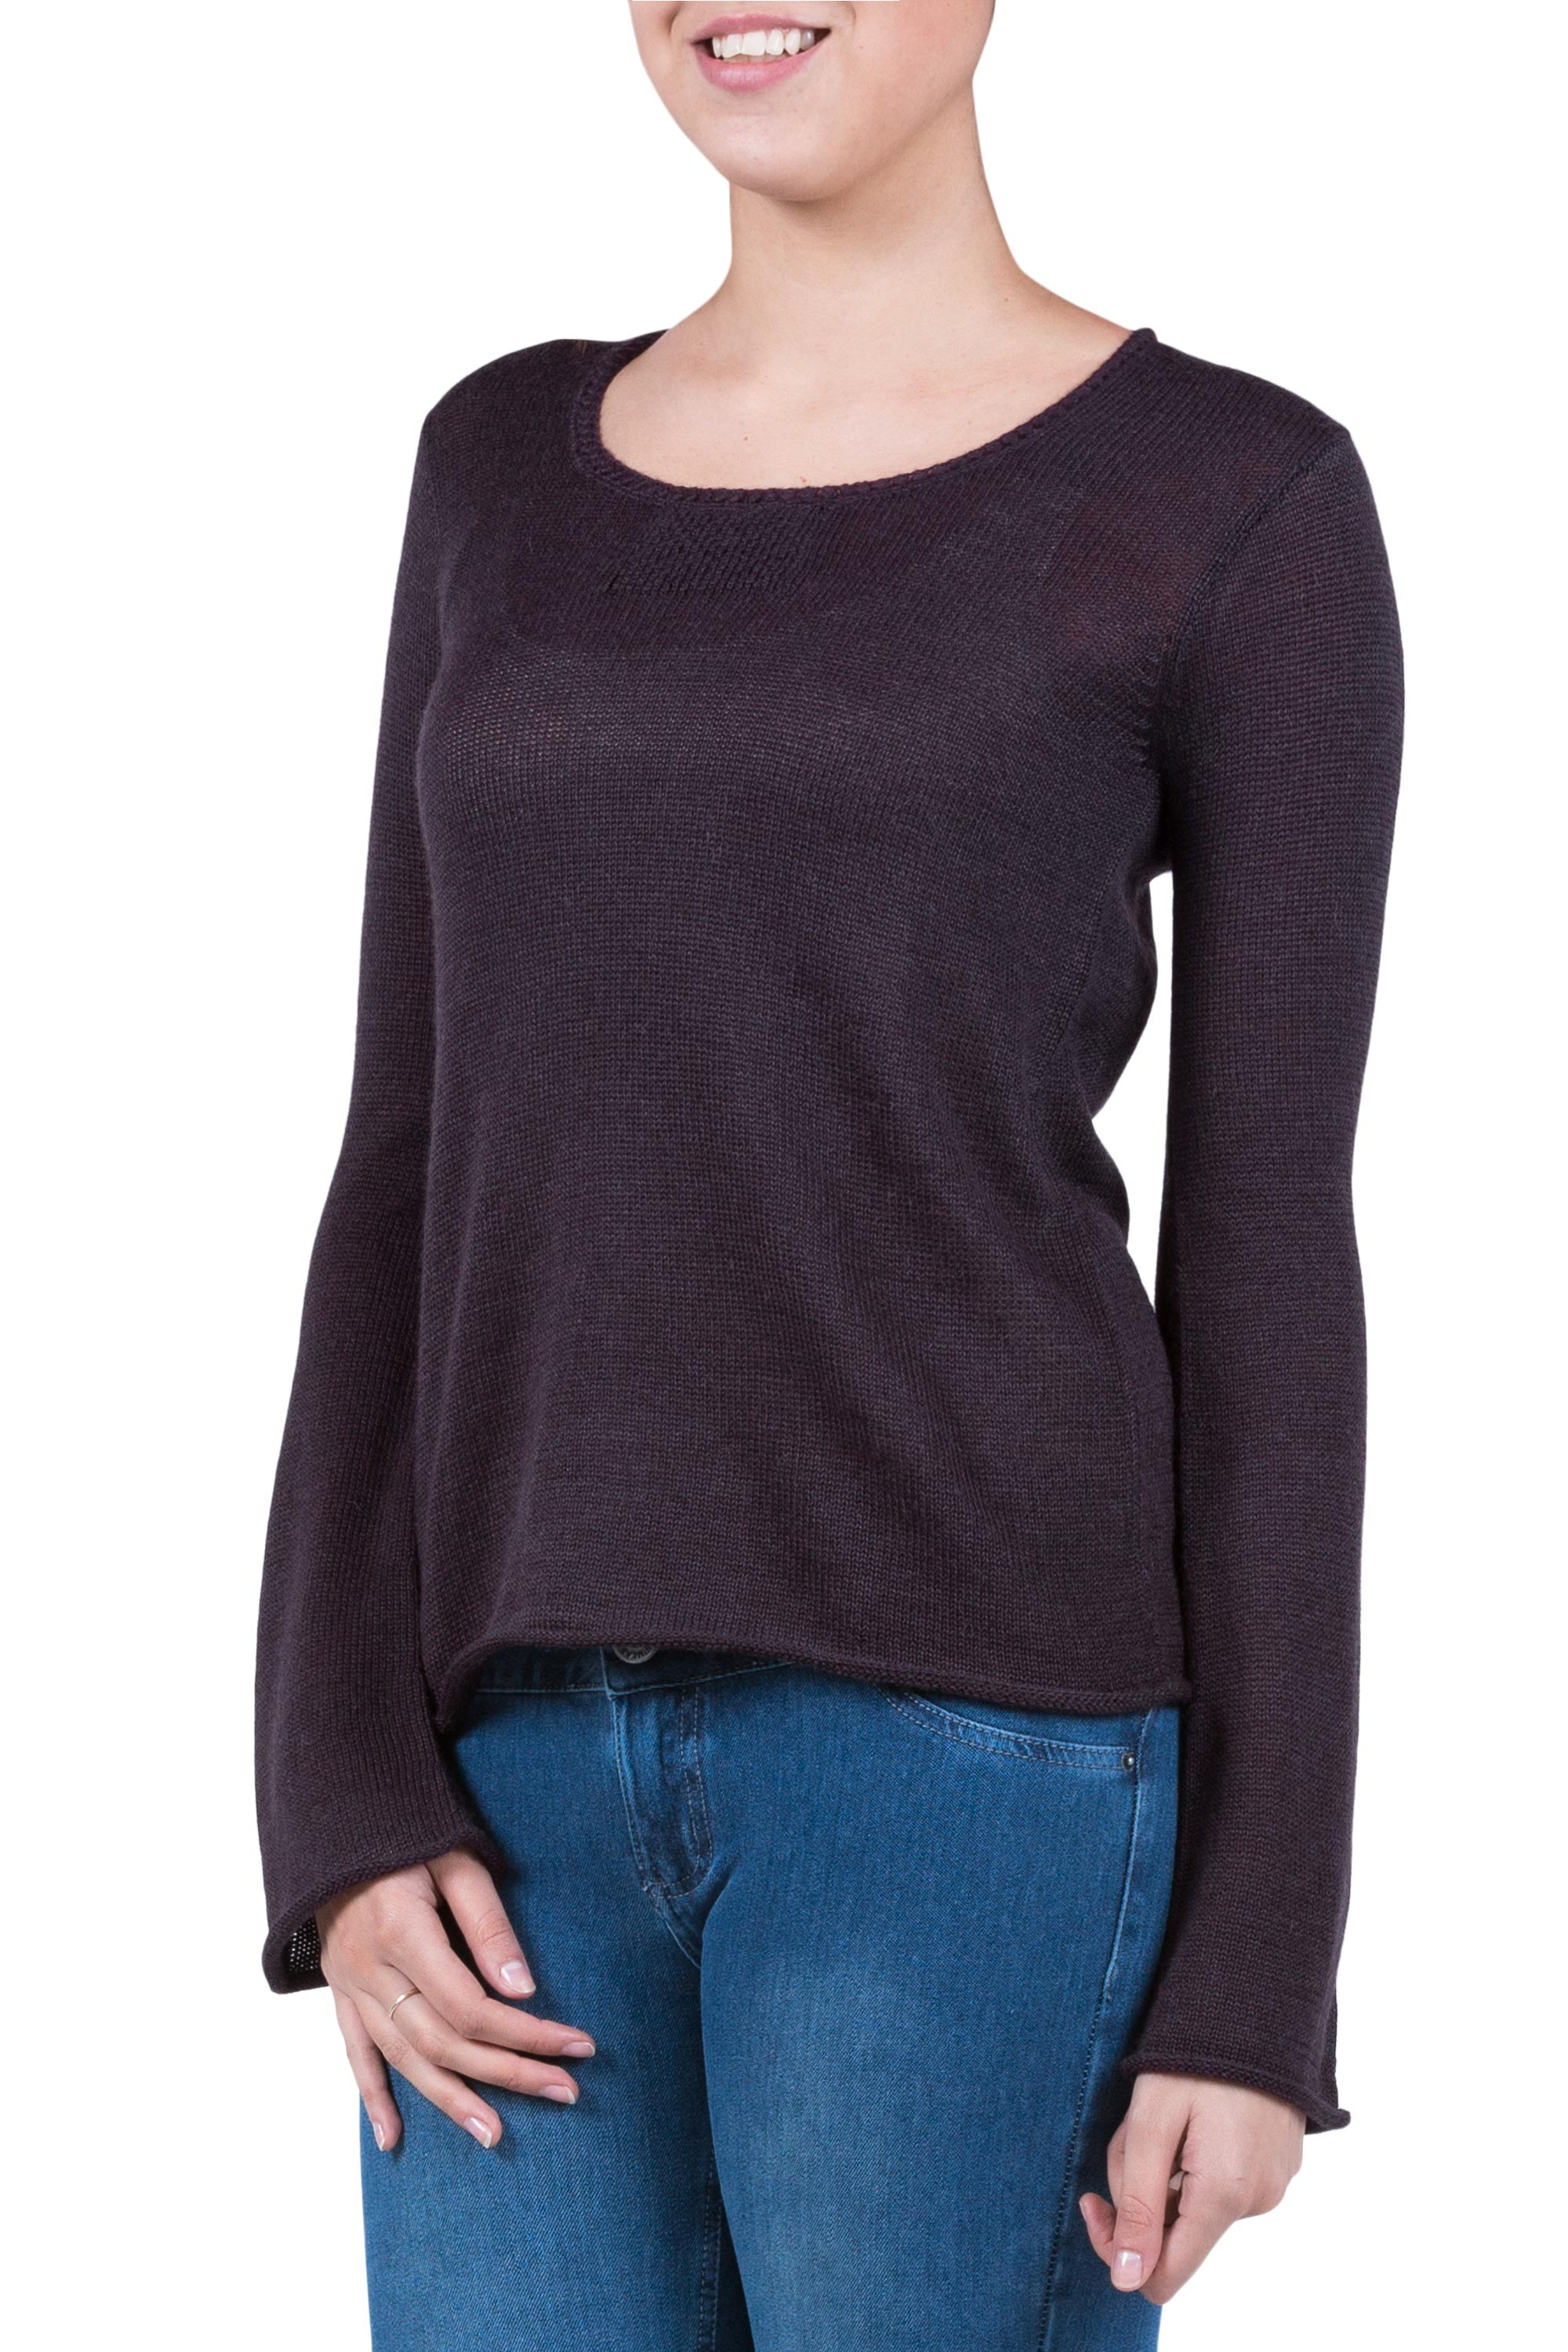 Purple Knitted Andean Alpaca Blend Pullover Sweater - Purple Charisma ...